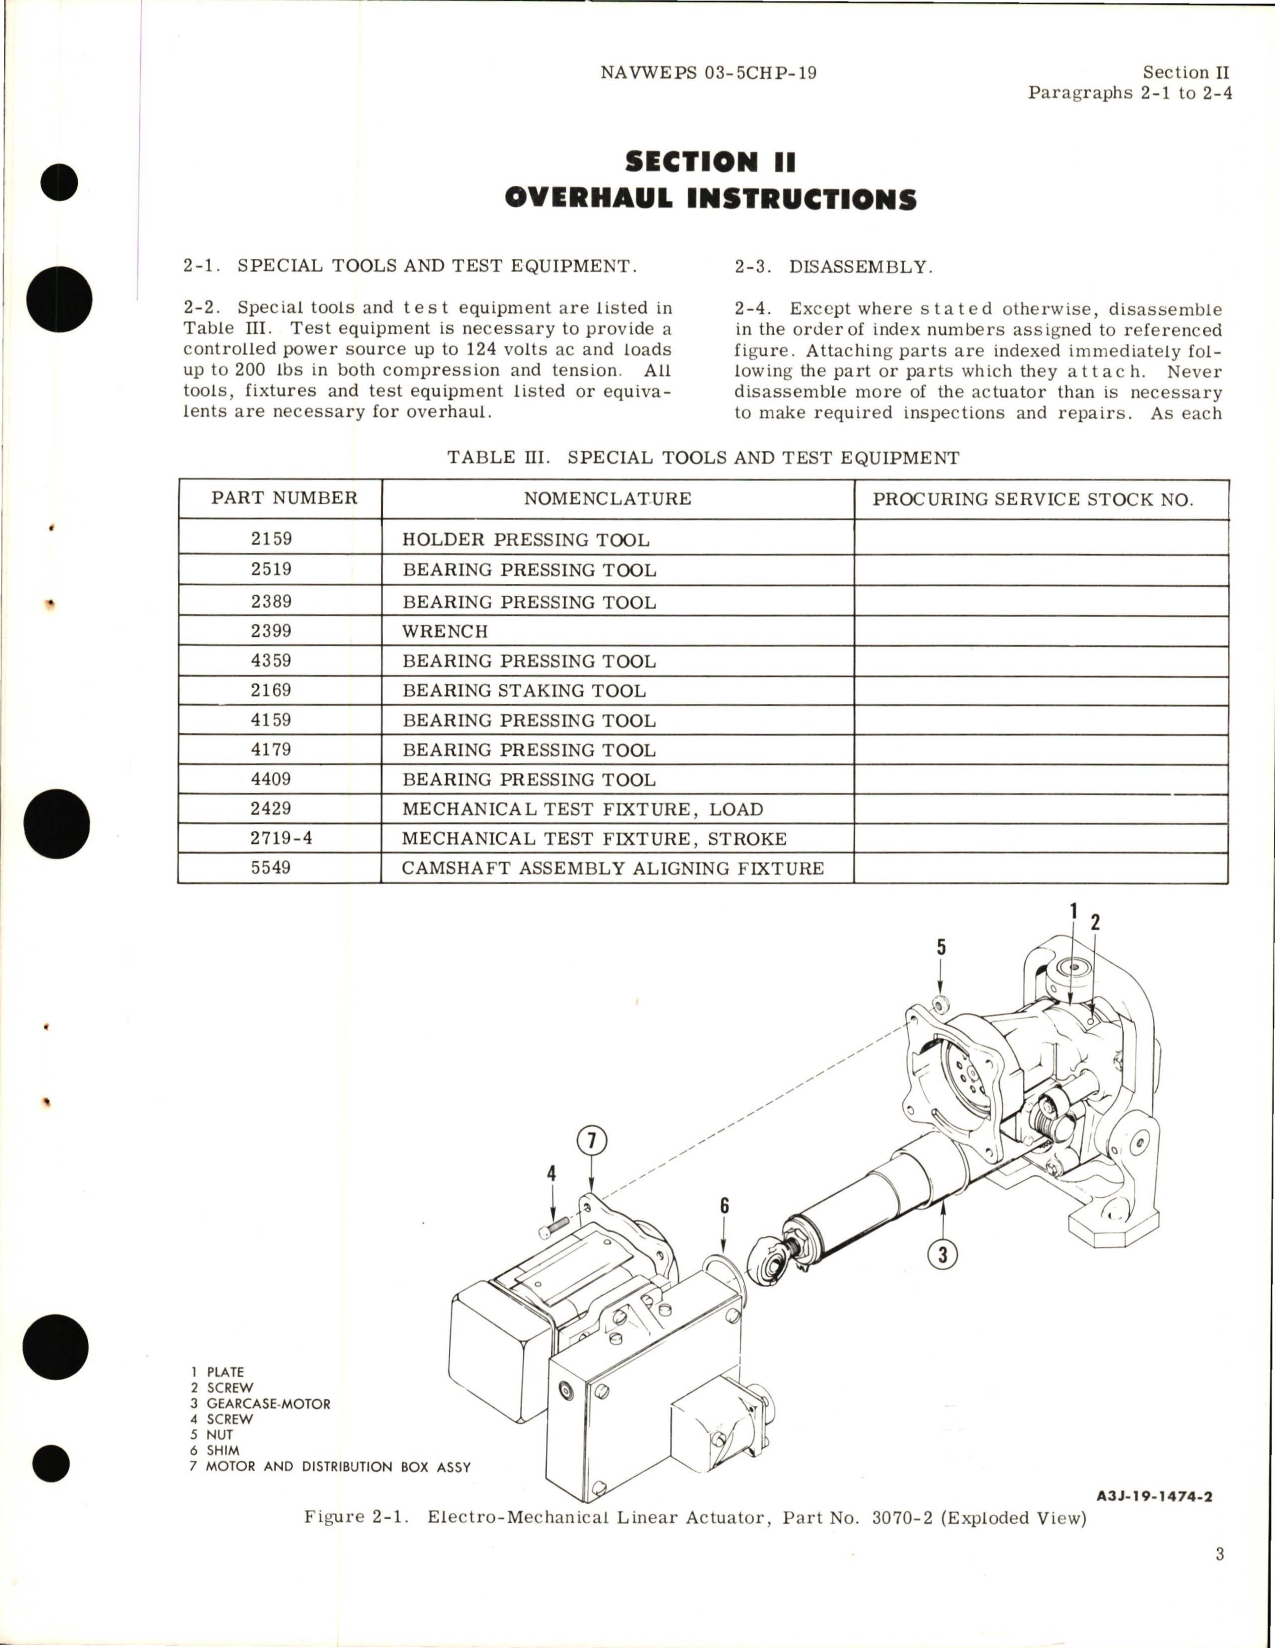 Sample page 7 from AirCorps Library document: Overhaul Instructions for Electro-Mechanical Linear Actuator 3070-2 and 36070-22